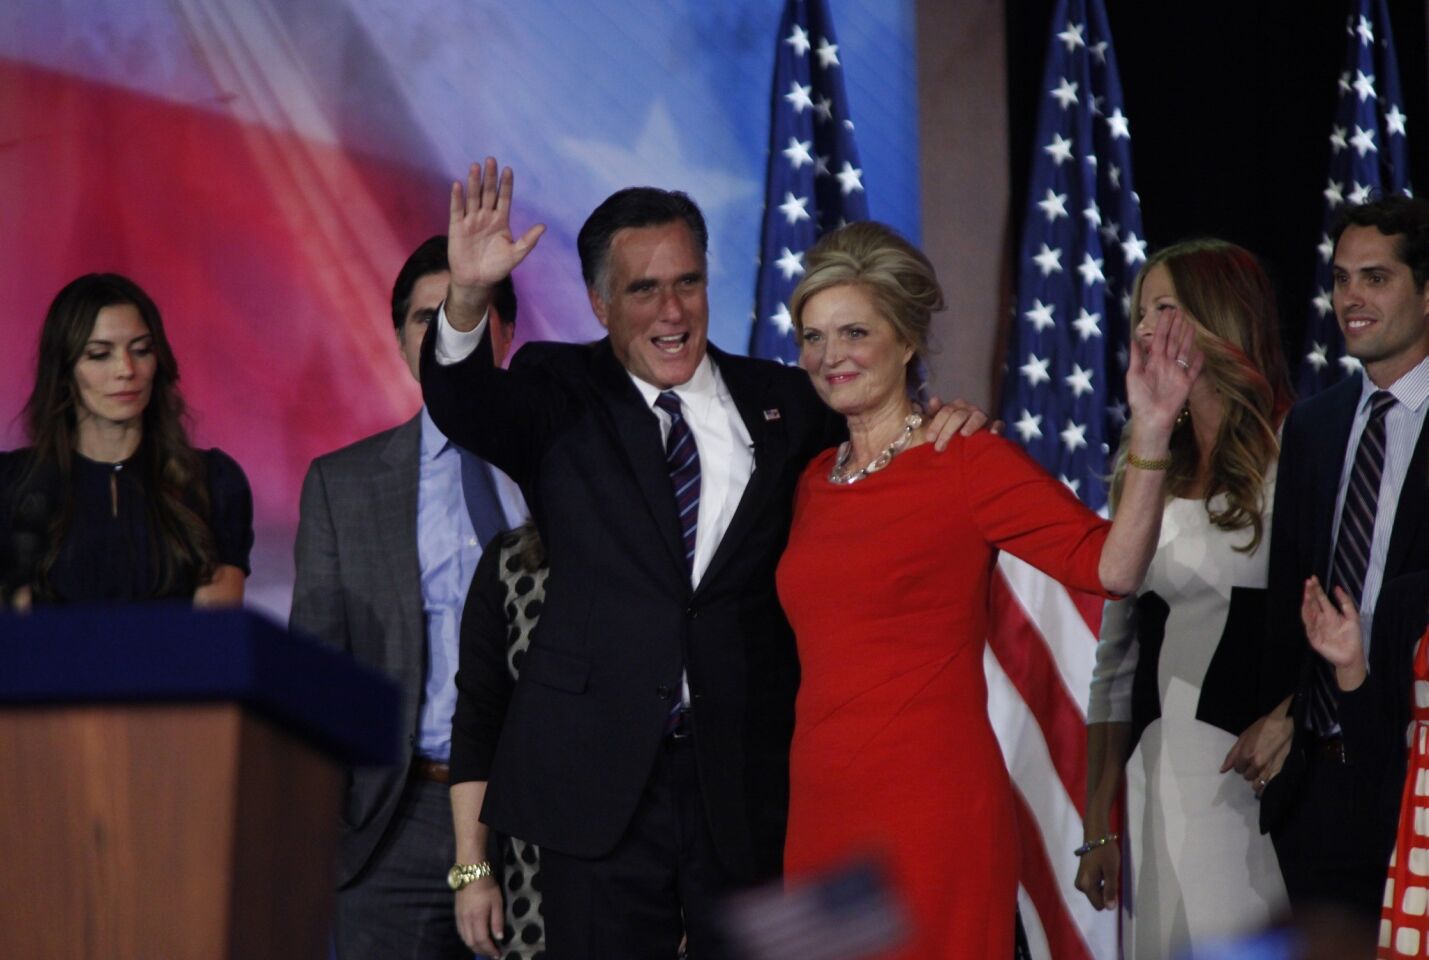 GOP presidential challenger Mitt Romney and wife Ann wave to supporters at the Boston Convention Center.